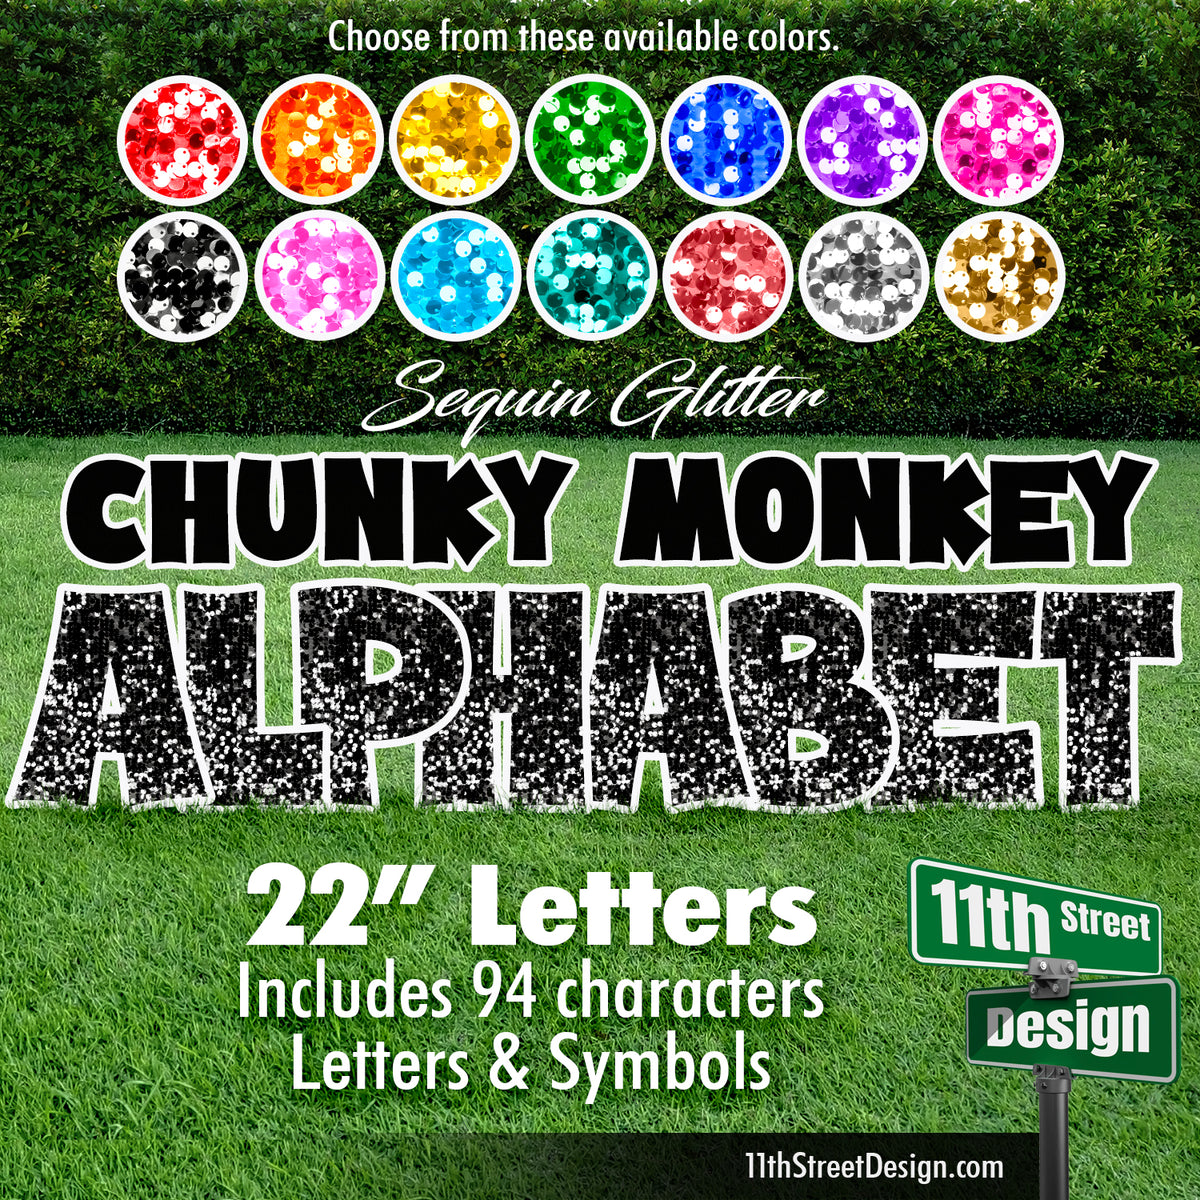 Sequin Glitter 22&quot; Chunky Monkey Full Alphabet Yard Card Set Includes Letters &amp; Symbols